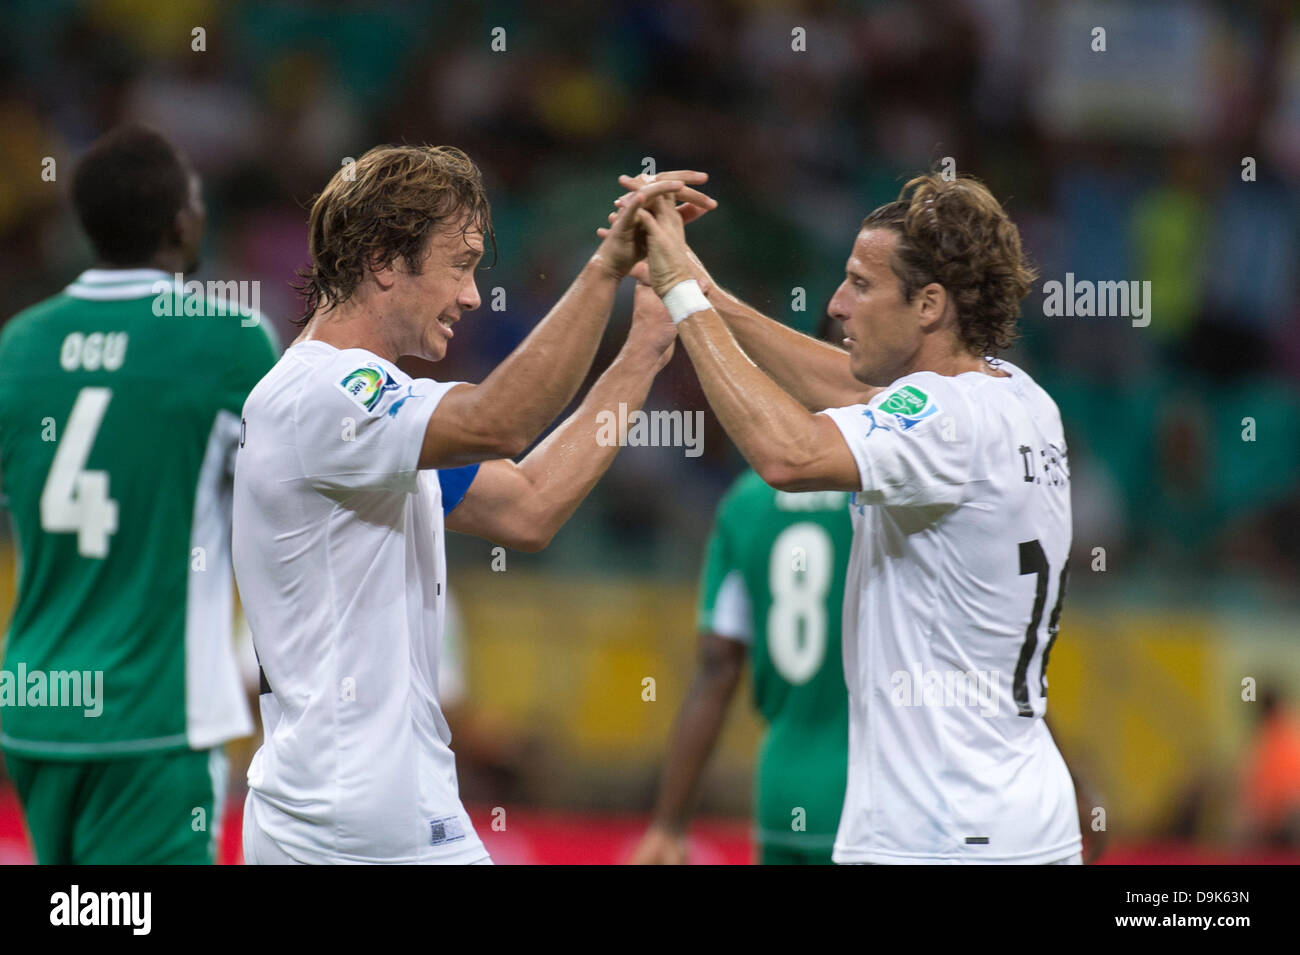 Salvator, Brazil. 20th June, 2013. (L-R) Diego Lugano, Diego Forlan (URU), JUNE 20, 2013 - Football / Soccer : Diego Lugano of Uruguay celebrates after scoring their 1st goal during the FIFA Confederations Cup Brazil 2013 Group B match between Nigeria 1-2 Uruguay at Arena Fonte Nova in Salvador, Brazil. (Photo by Maurizio Borsari/AFLO/Alamy Live News) Stock Photo